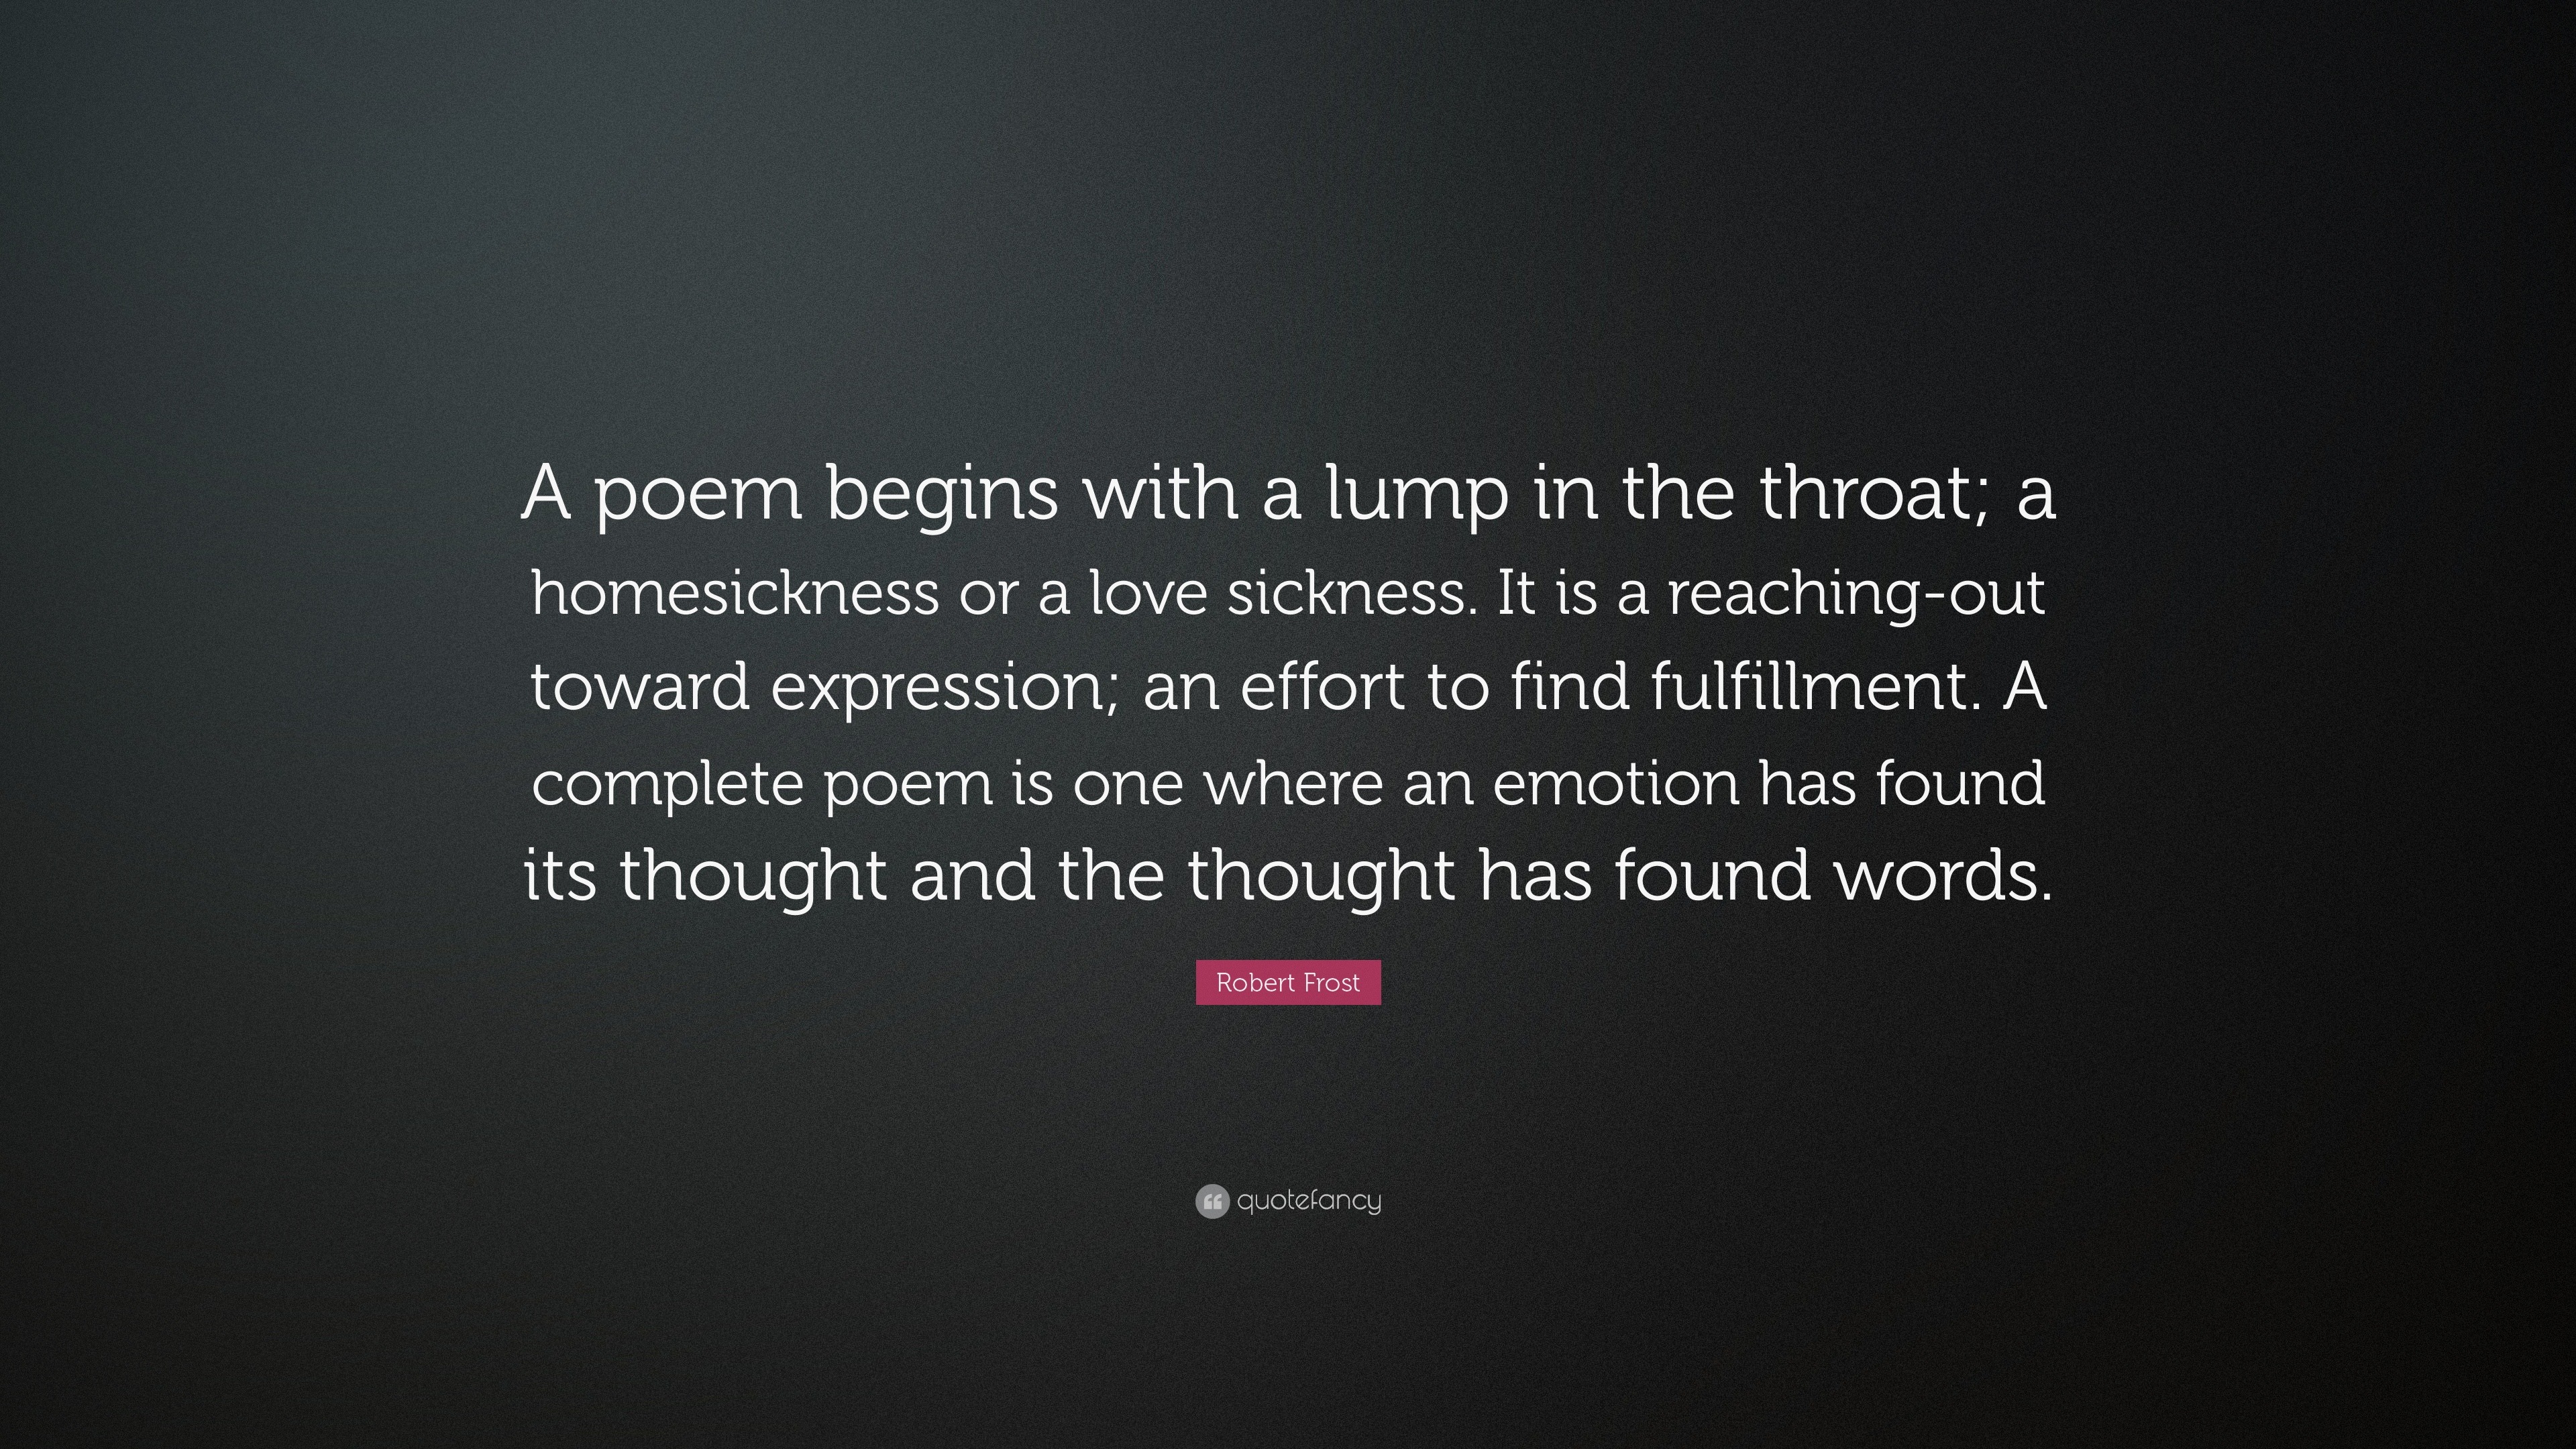 Robert Frost Quote “A poem begins with a lump in the throat a